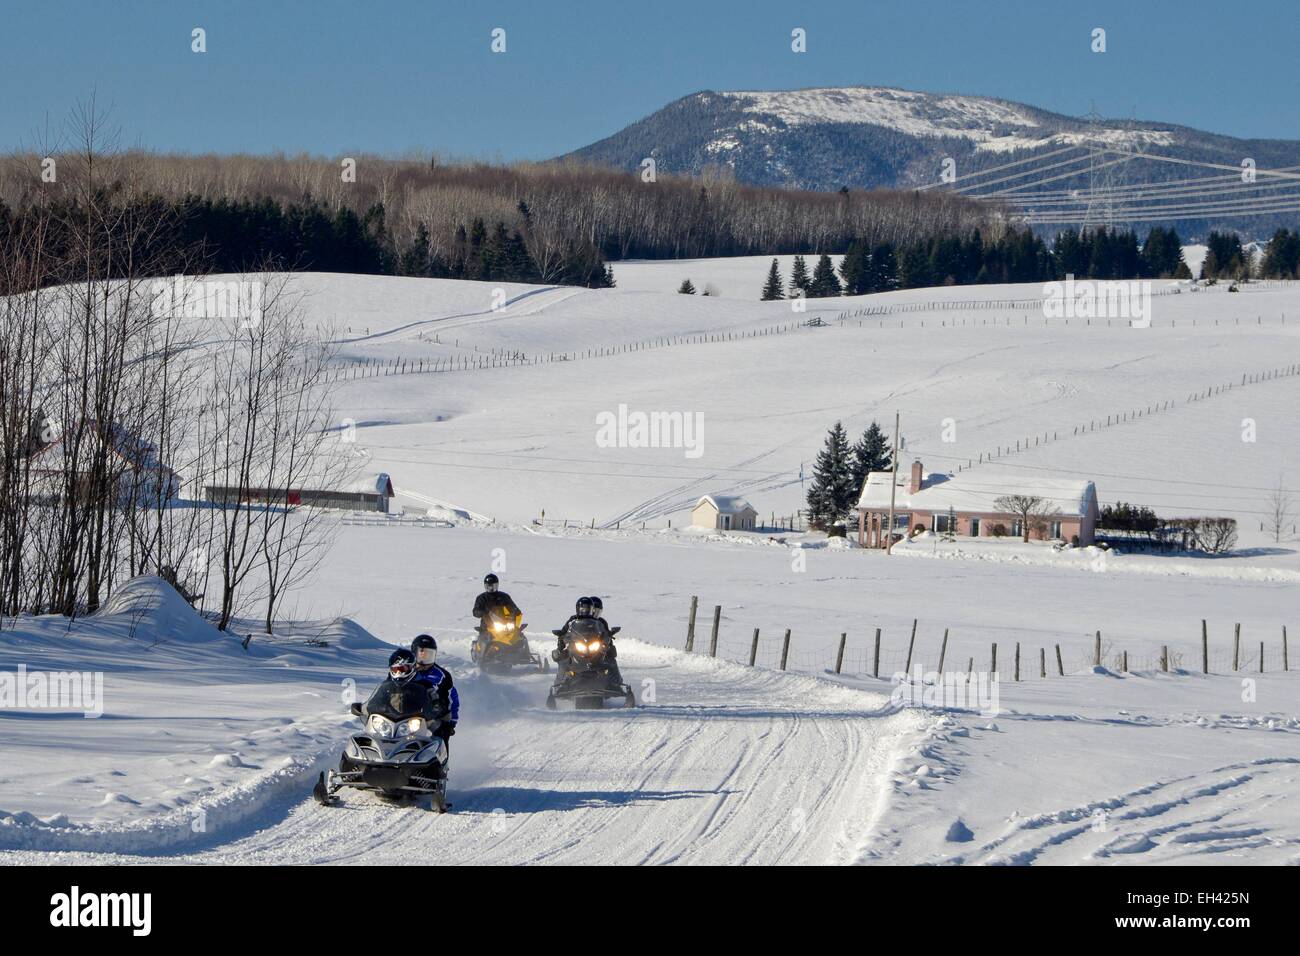 Canada, Quebec province, region of Charlevoix, Baie Saint Paul, column of snowmobiles in single file on a track marked out with a house and a background mountain Stock Photo